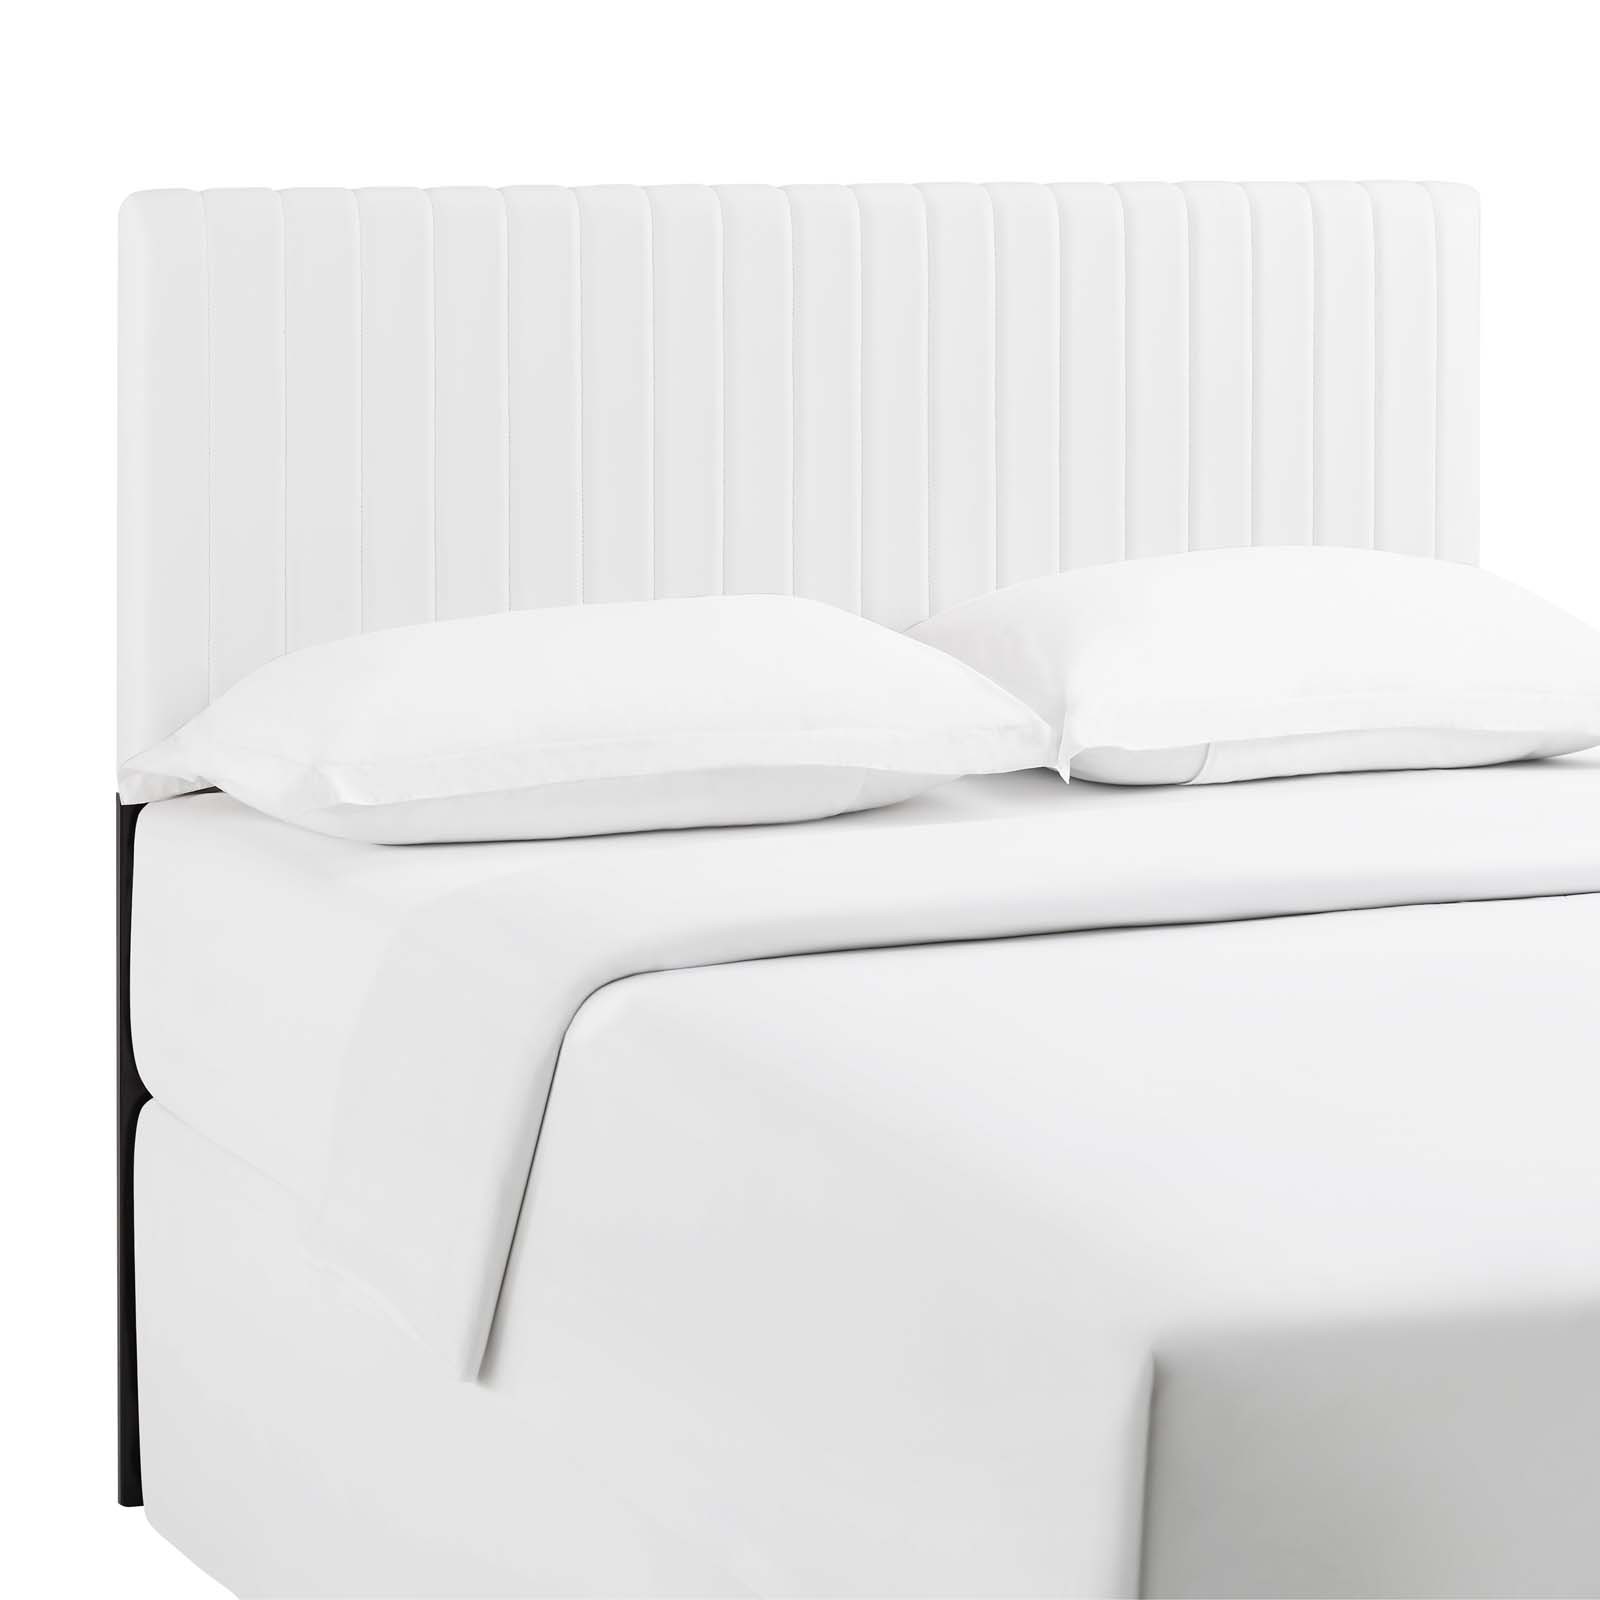 Keira Full/Queen Faux Leather Headboard in White